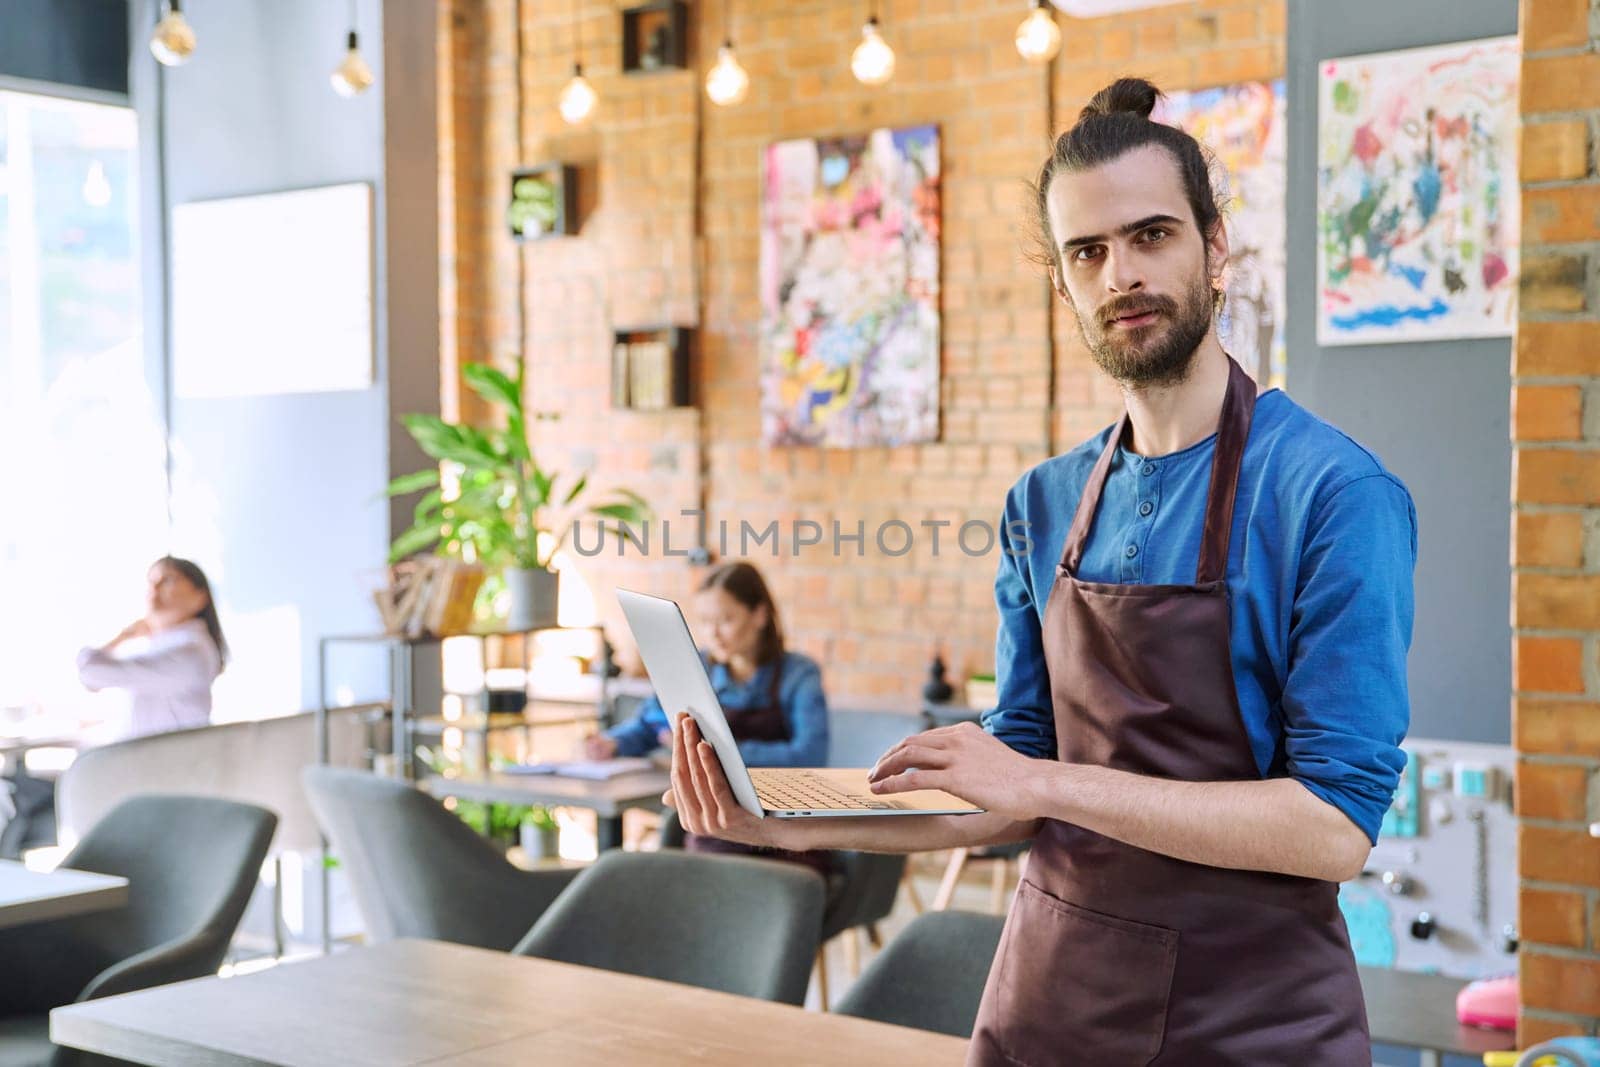 Successful young man service worker owner in apron holding using laptop computer looking at camera in restaurant cafeteria coffee pastry shop interior. Small business staff occupation entrepreneur work